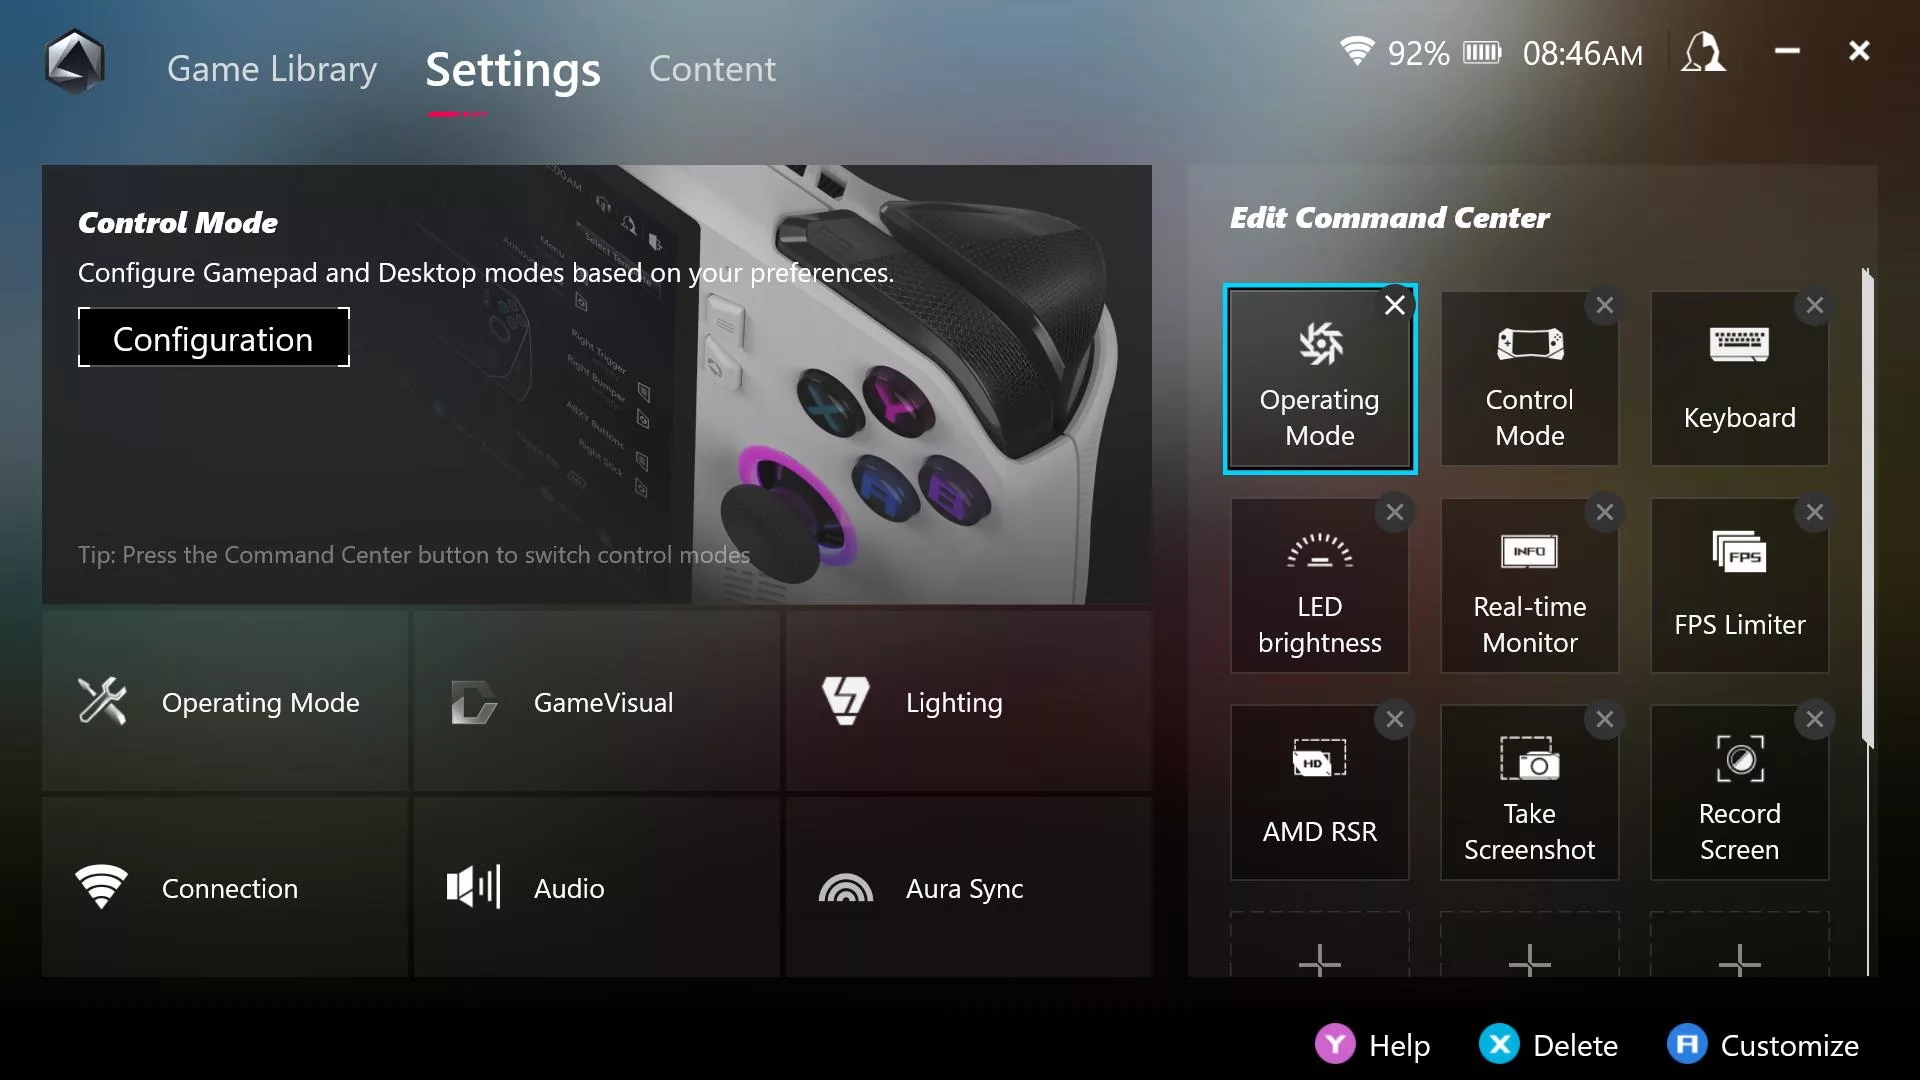 A screenshot of Armoury Crate's Settings menu, with the ability to edit Command Center functions.